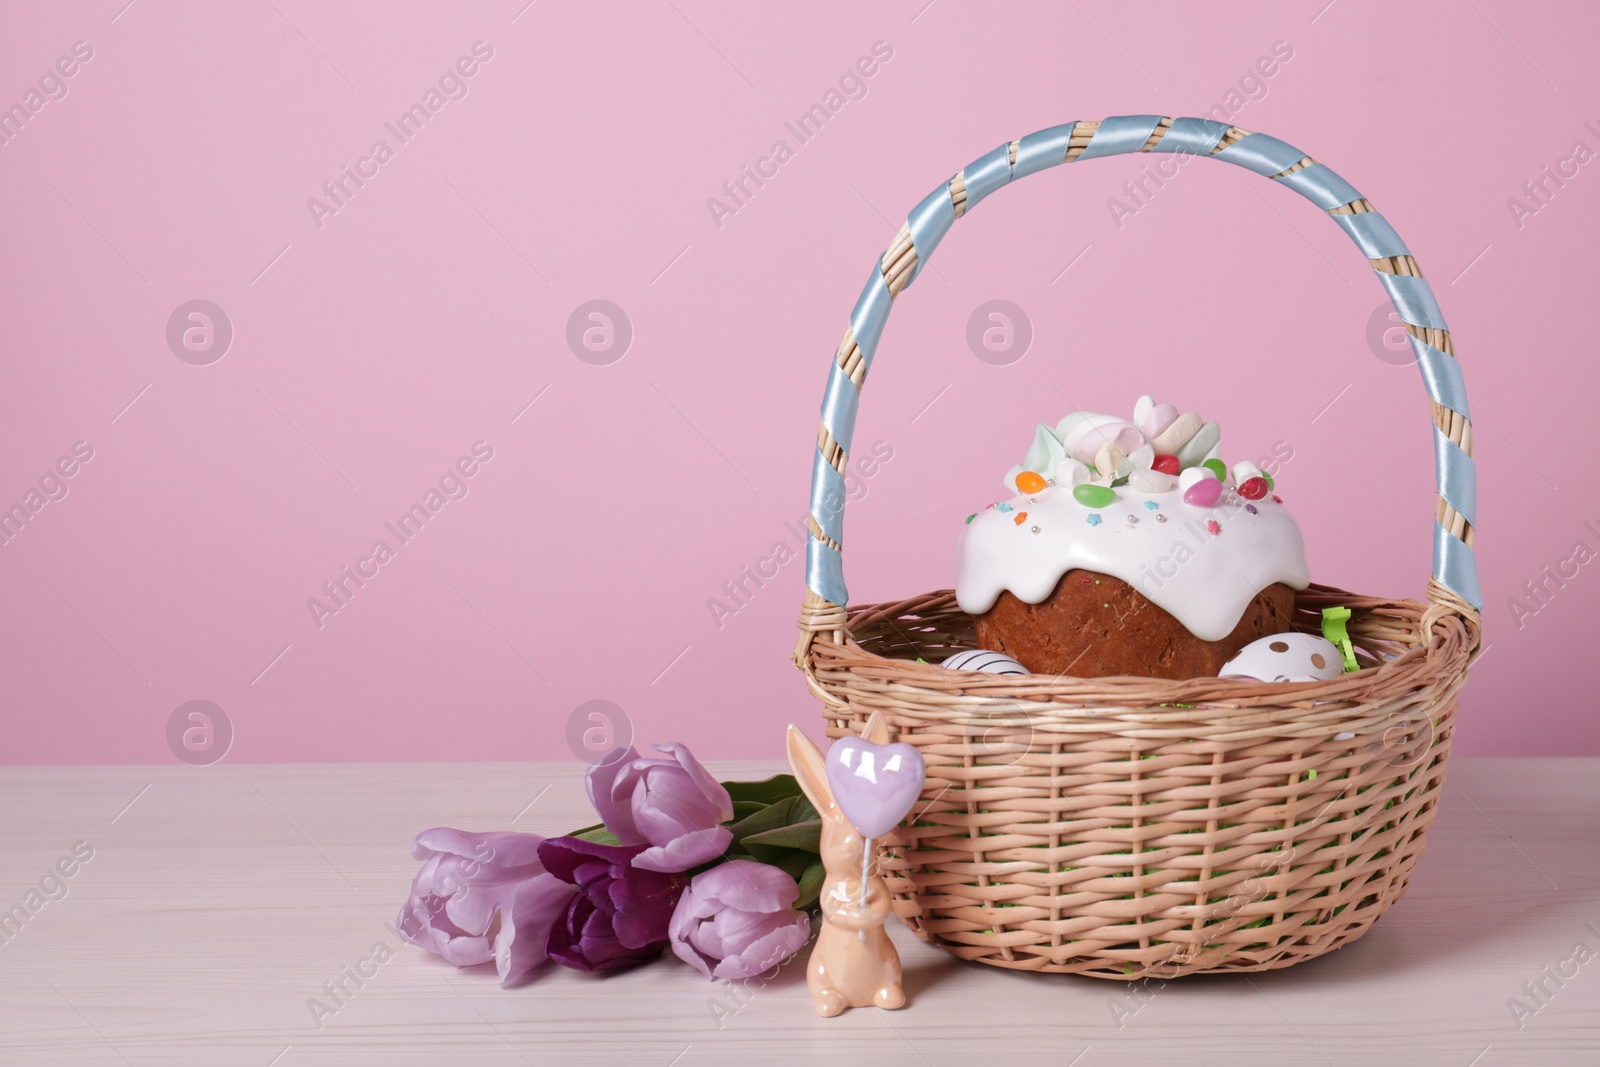 Photo of Easter basket with painted eggs, tasty cake, flowers and rabbit figure on white wooden table. Space for text